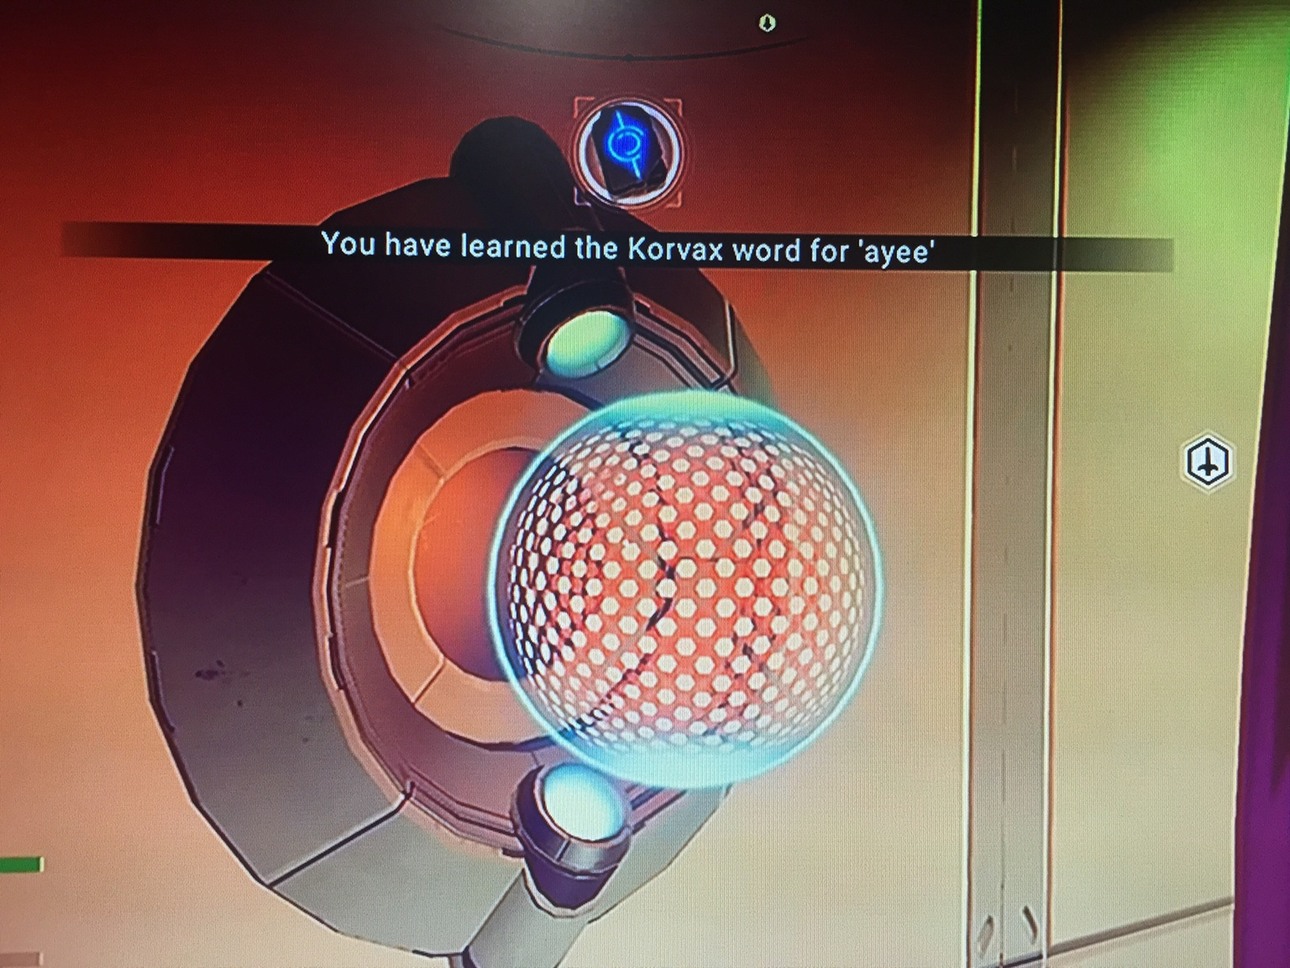 How to tell aliens you want to party in No Mans Sky - meme